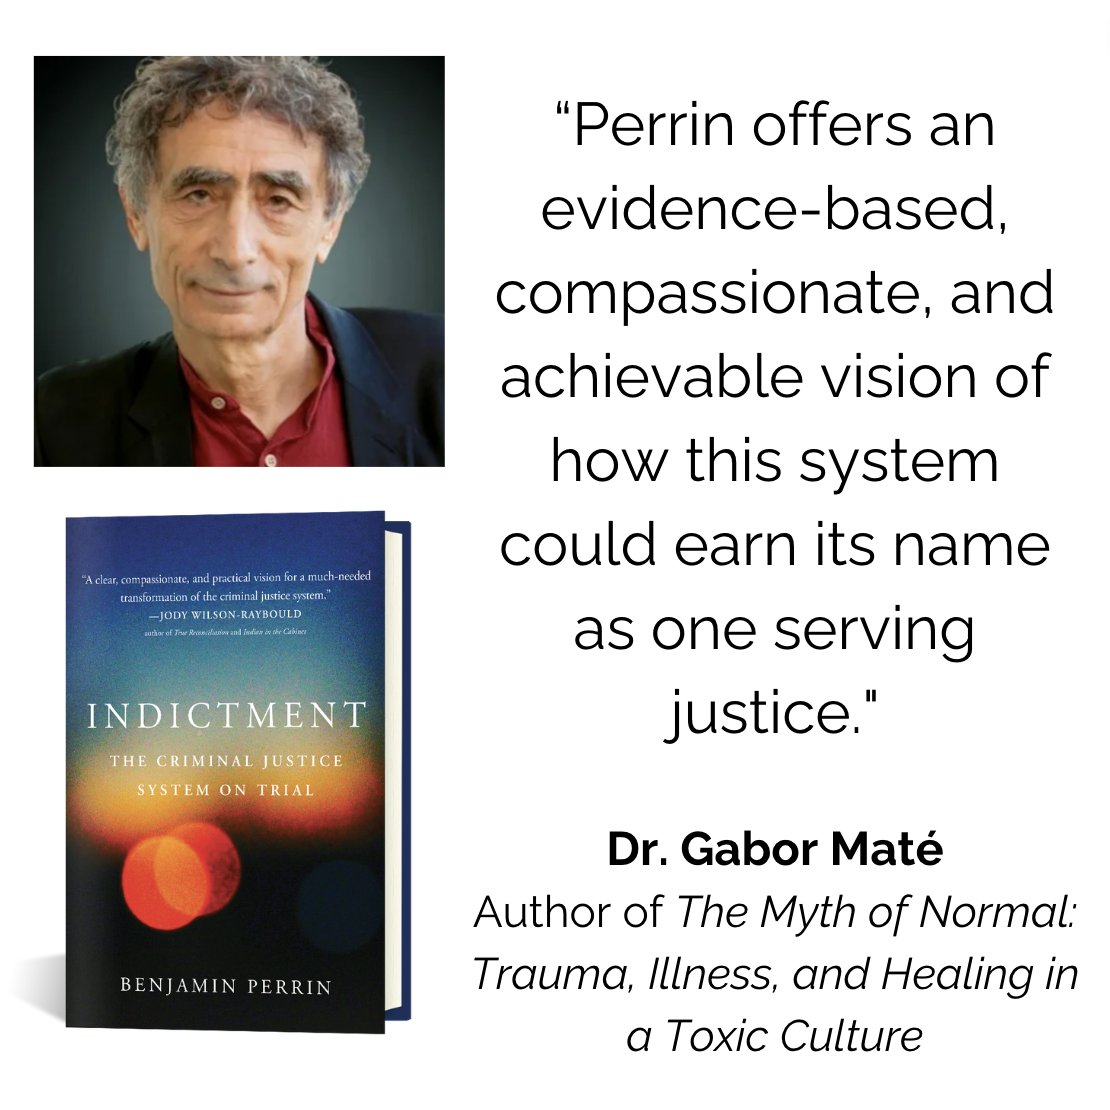 AMAZING conversation with @DrGaborMate on trauma and the criminal justice system. I also really appreciate him reading 'Indictment' and offering his support. Listen now: indictment.simplecast.com/episodes/s1e7